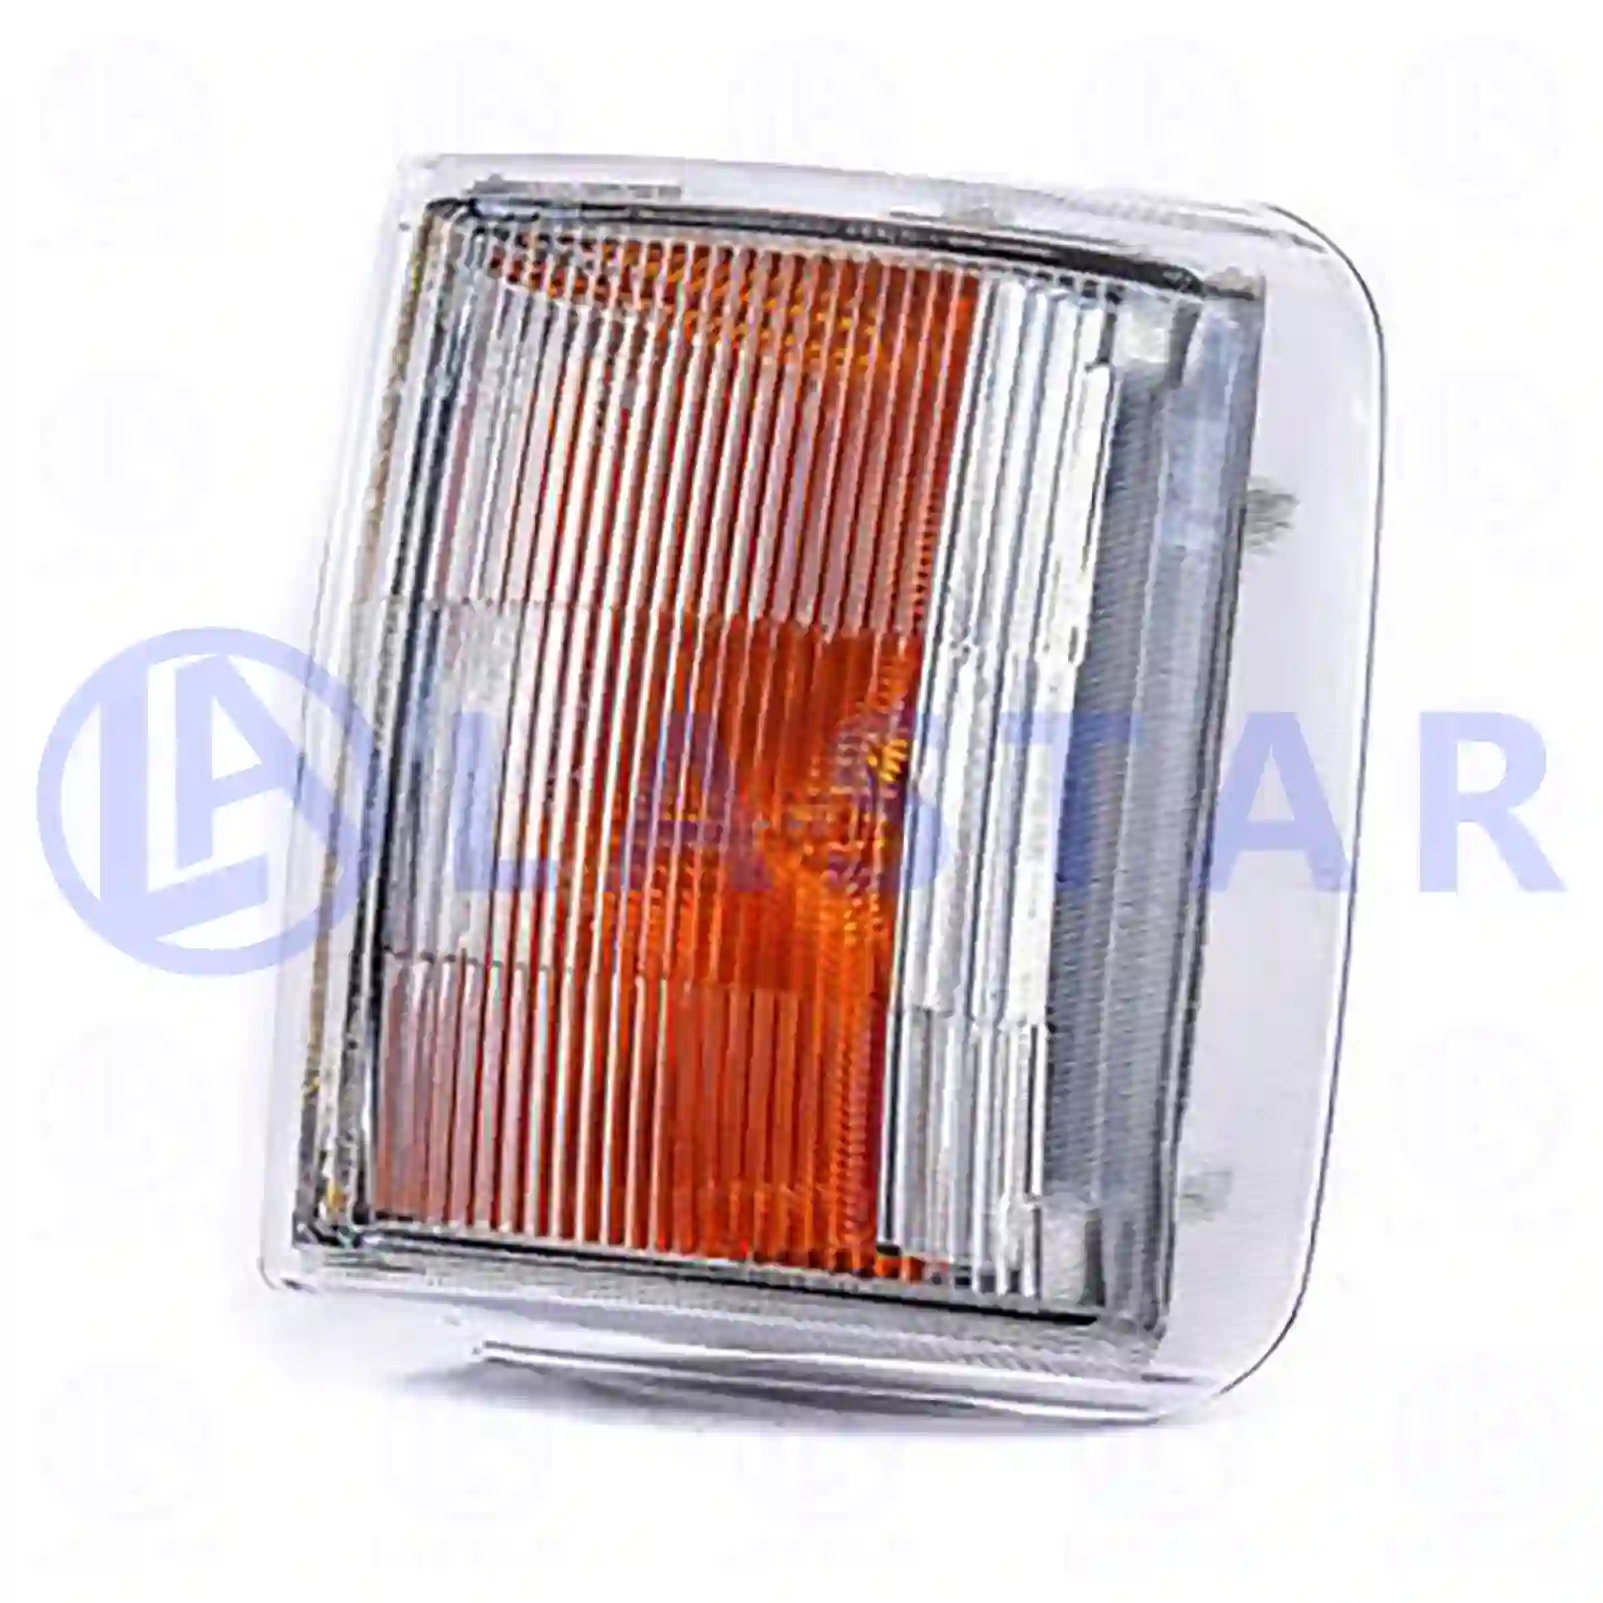 Turn signal lamp, right, without bulb, 77712450, 04855967, 4855967, 500340695, ZG21236-0008 ||  77712450 Lastar Spare Part | Truck Spare Parts, Auotomotive Spare Parts Turn signal lamp, right, without bulb, 77712450, 04855967, 4855967, 500340695, ZG21236-0008 ||  77712450 Lastar Spare Part | Truck Spare Parts, Auotomotive Spare Parts